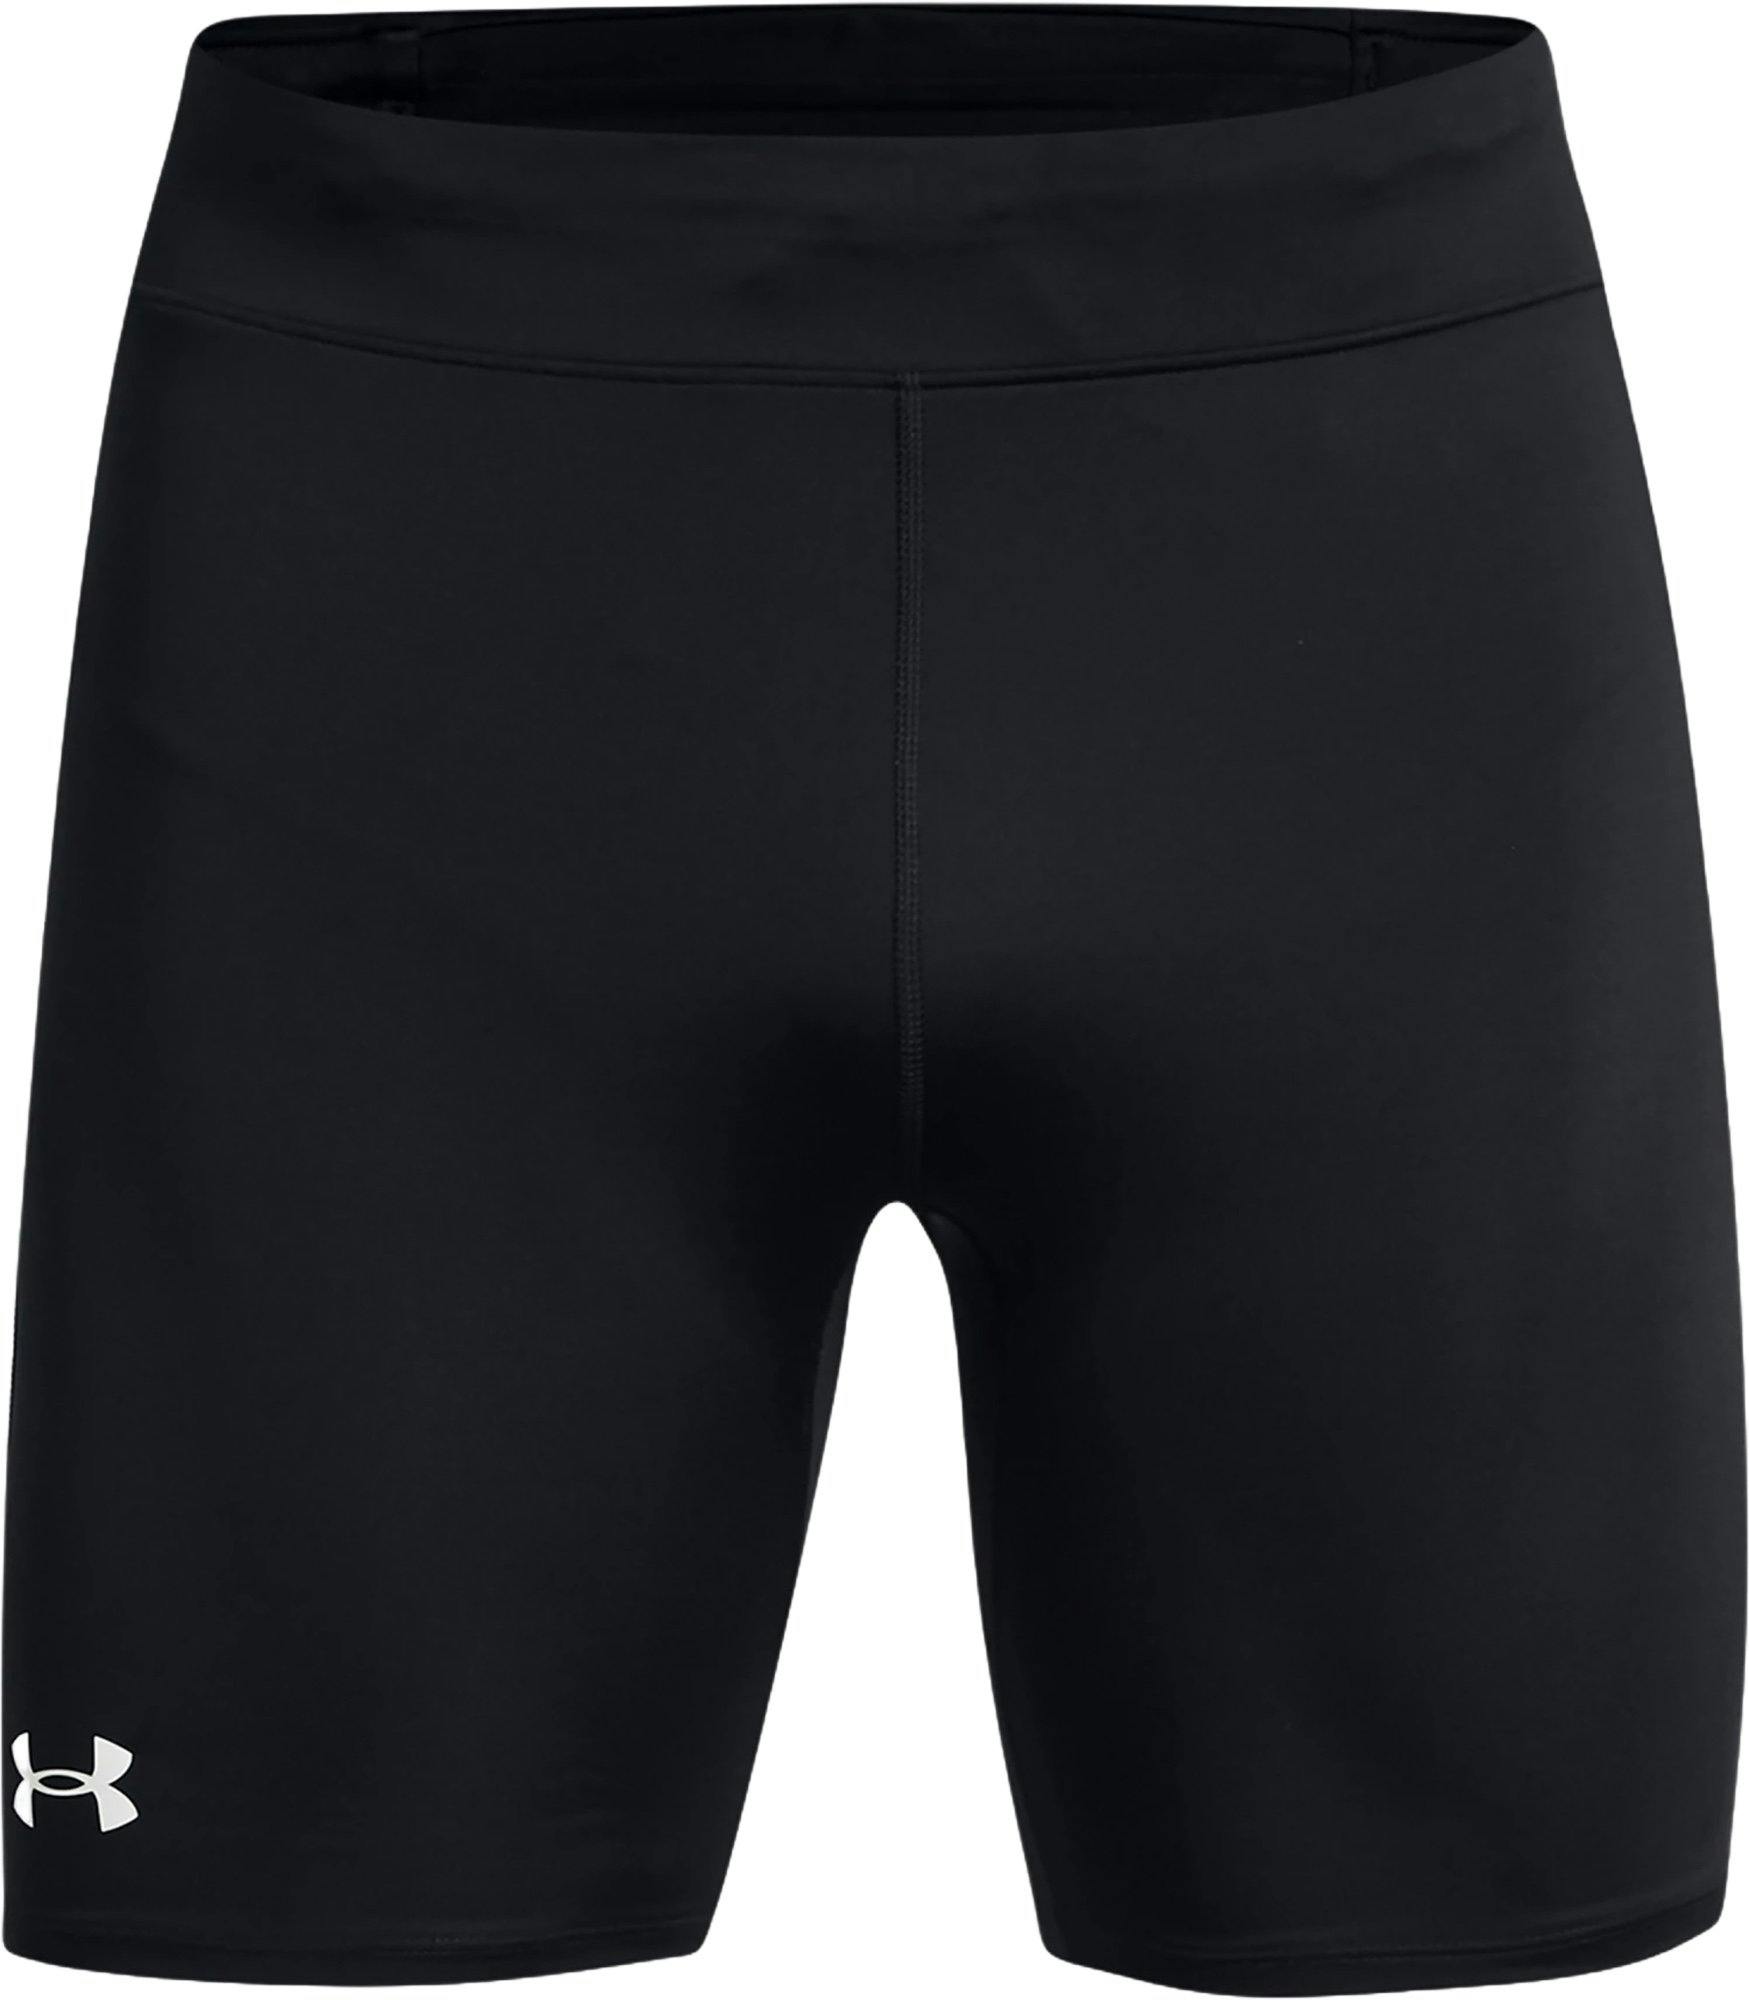 Product image for Launch ½ Tights - Men's 